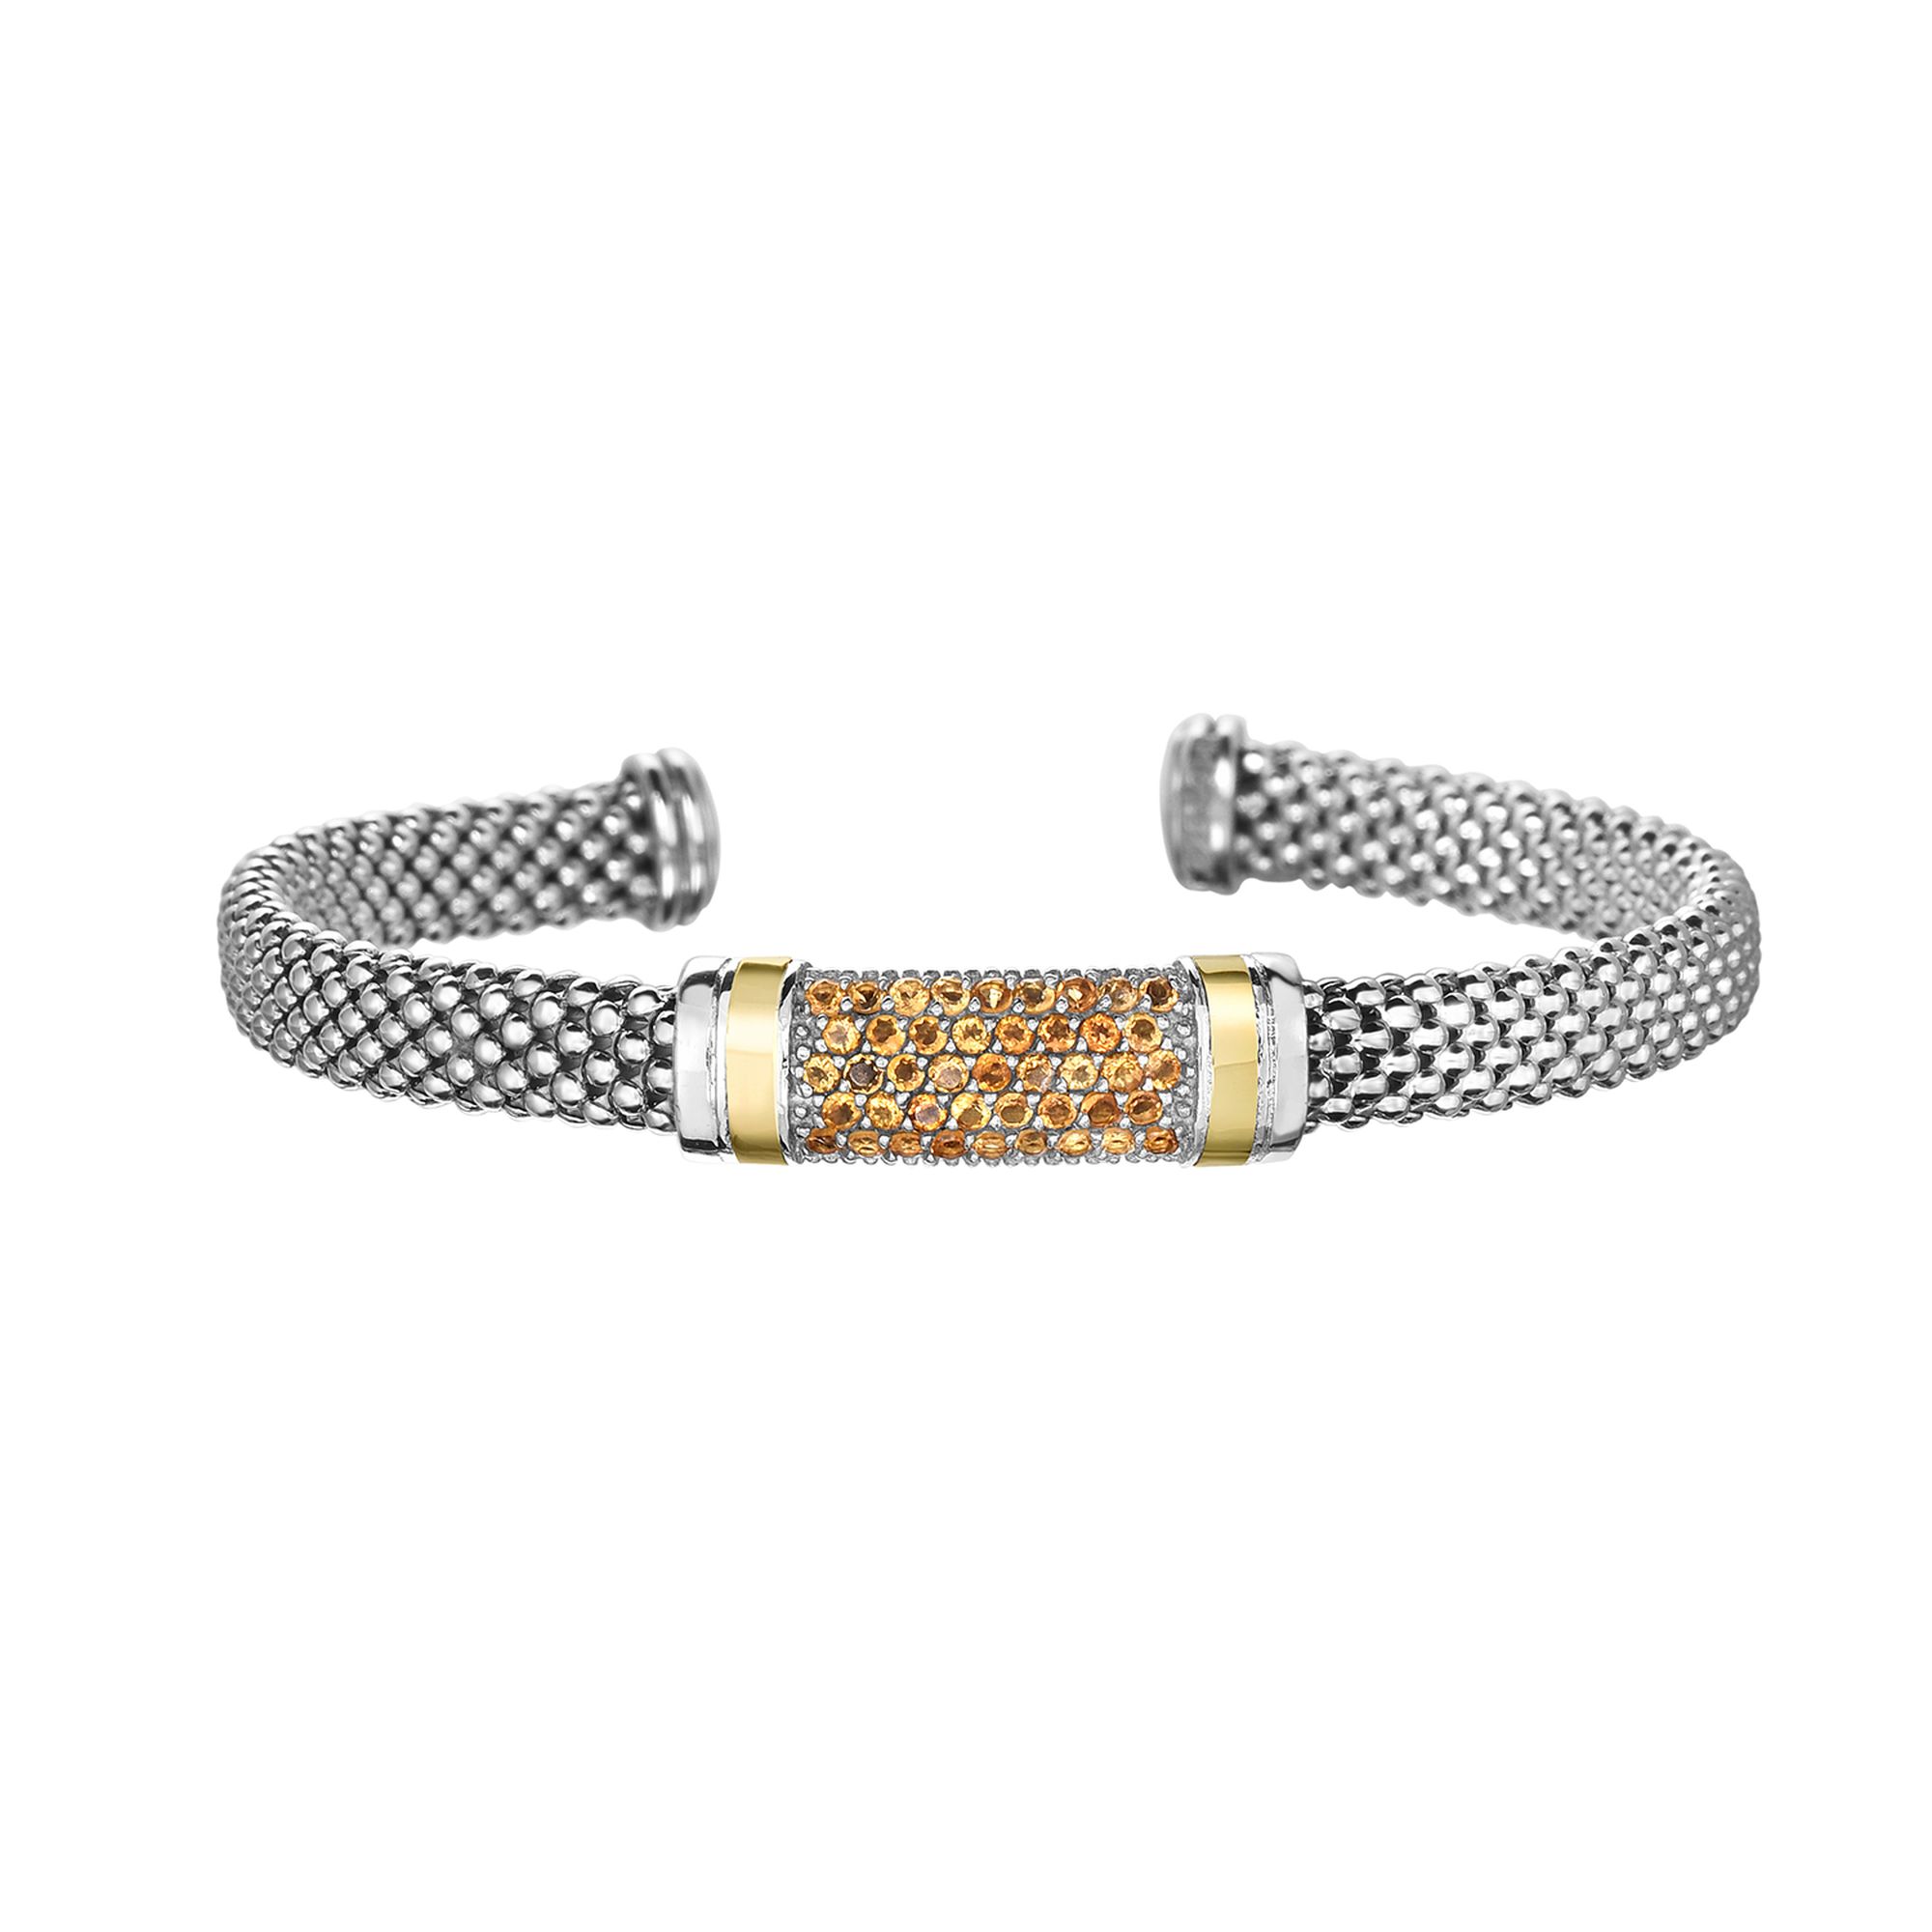 Popcorn Texture Bracelet with Hook Clasp and Diamonds in Sterling Silver